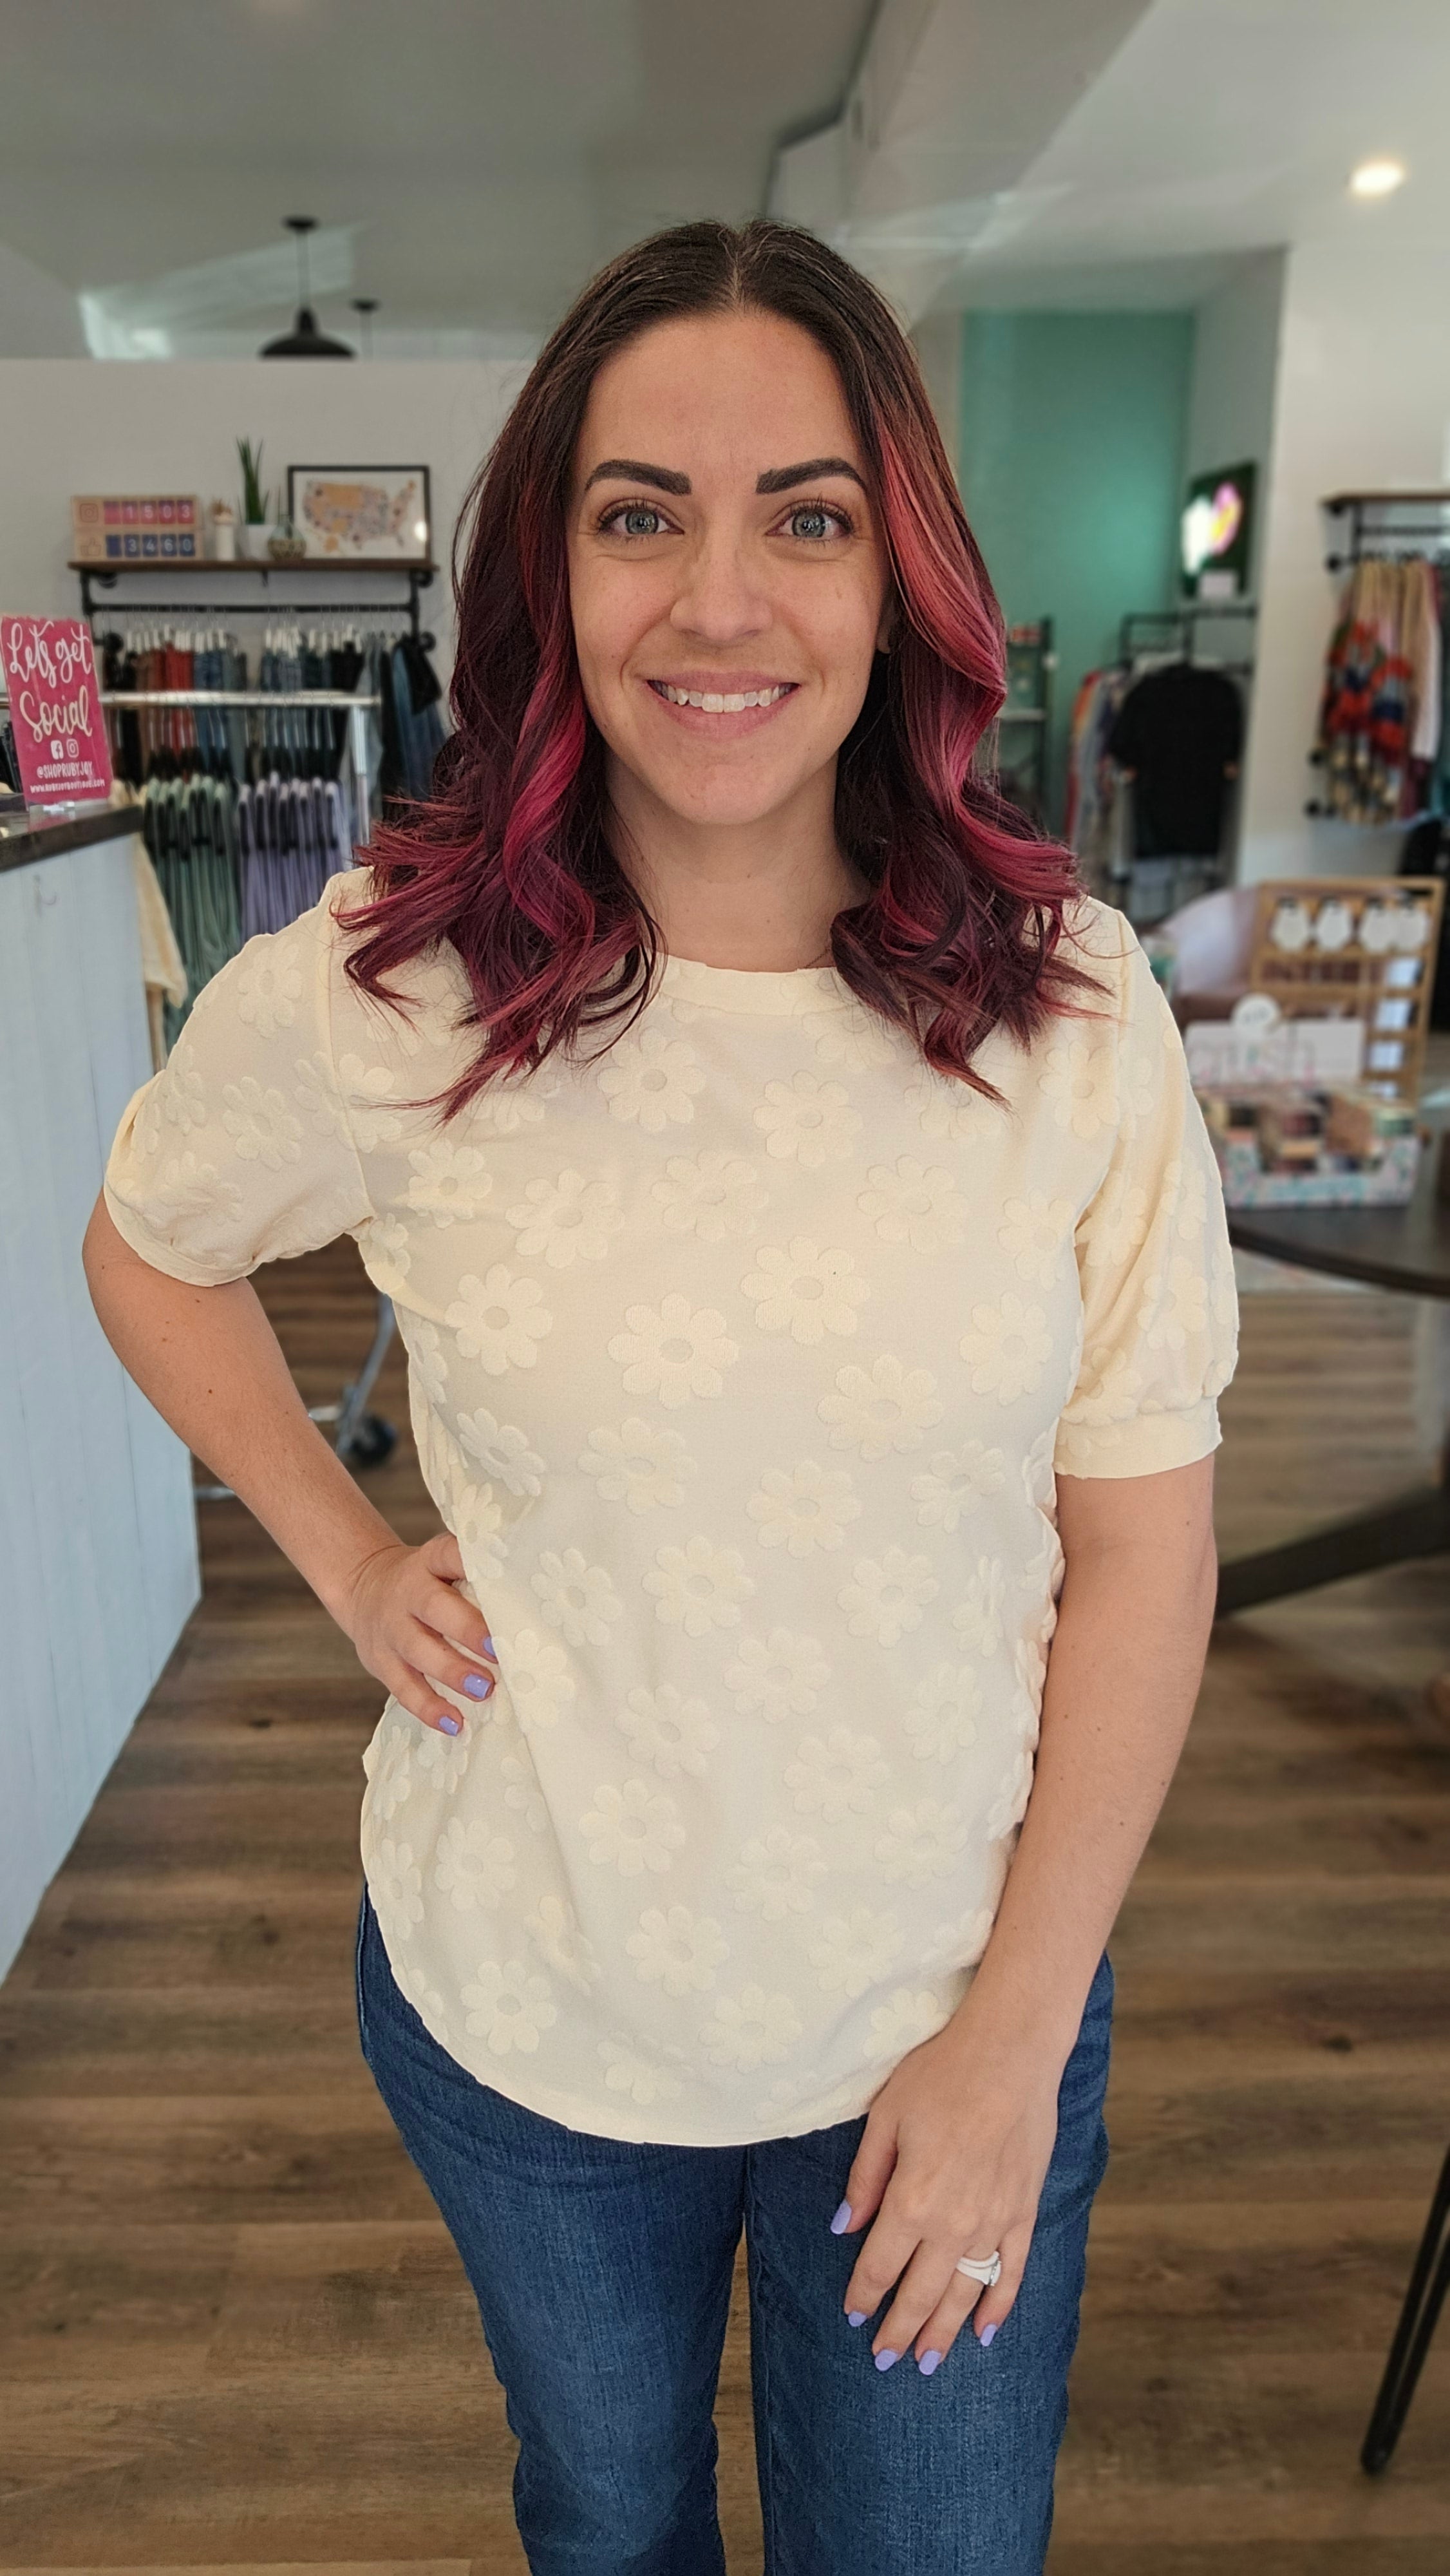 Shop Blossom Floral Pattern Top-Blouse at Ruby Joy Boutique, a Women's Clothing Store in Pickerington, Ohio